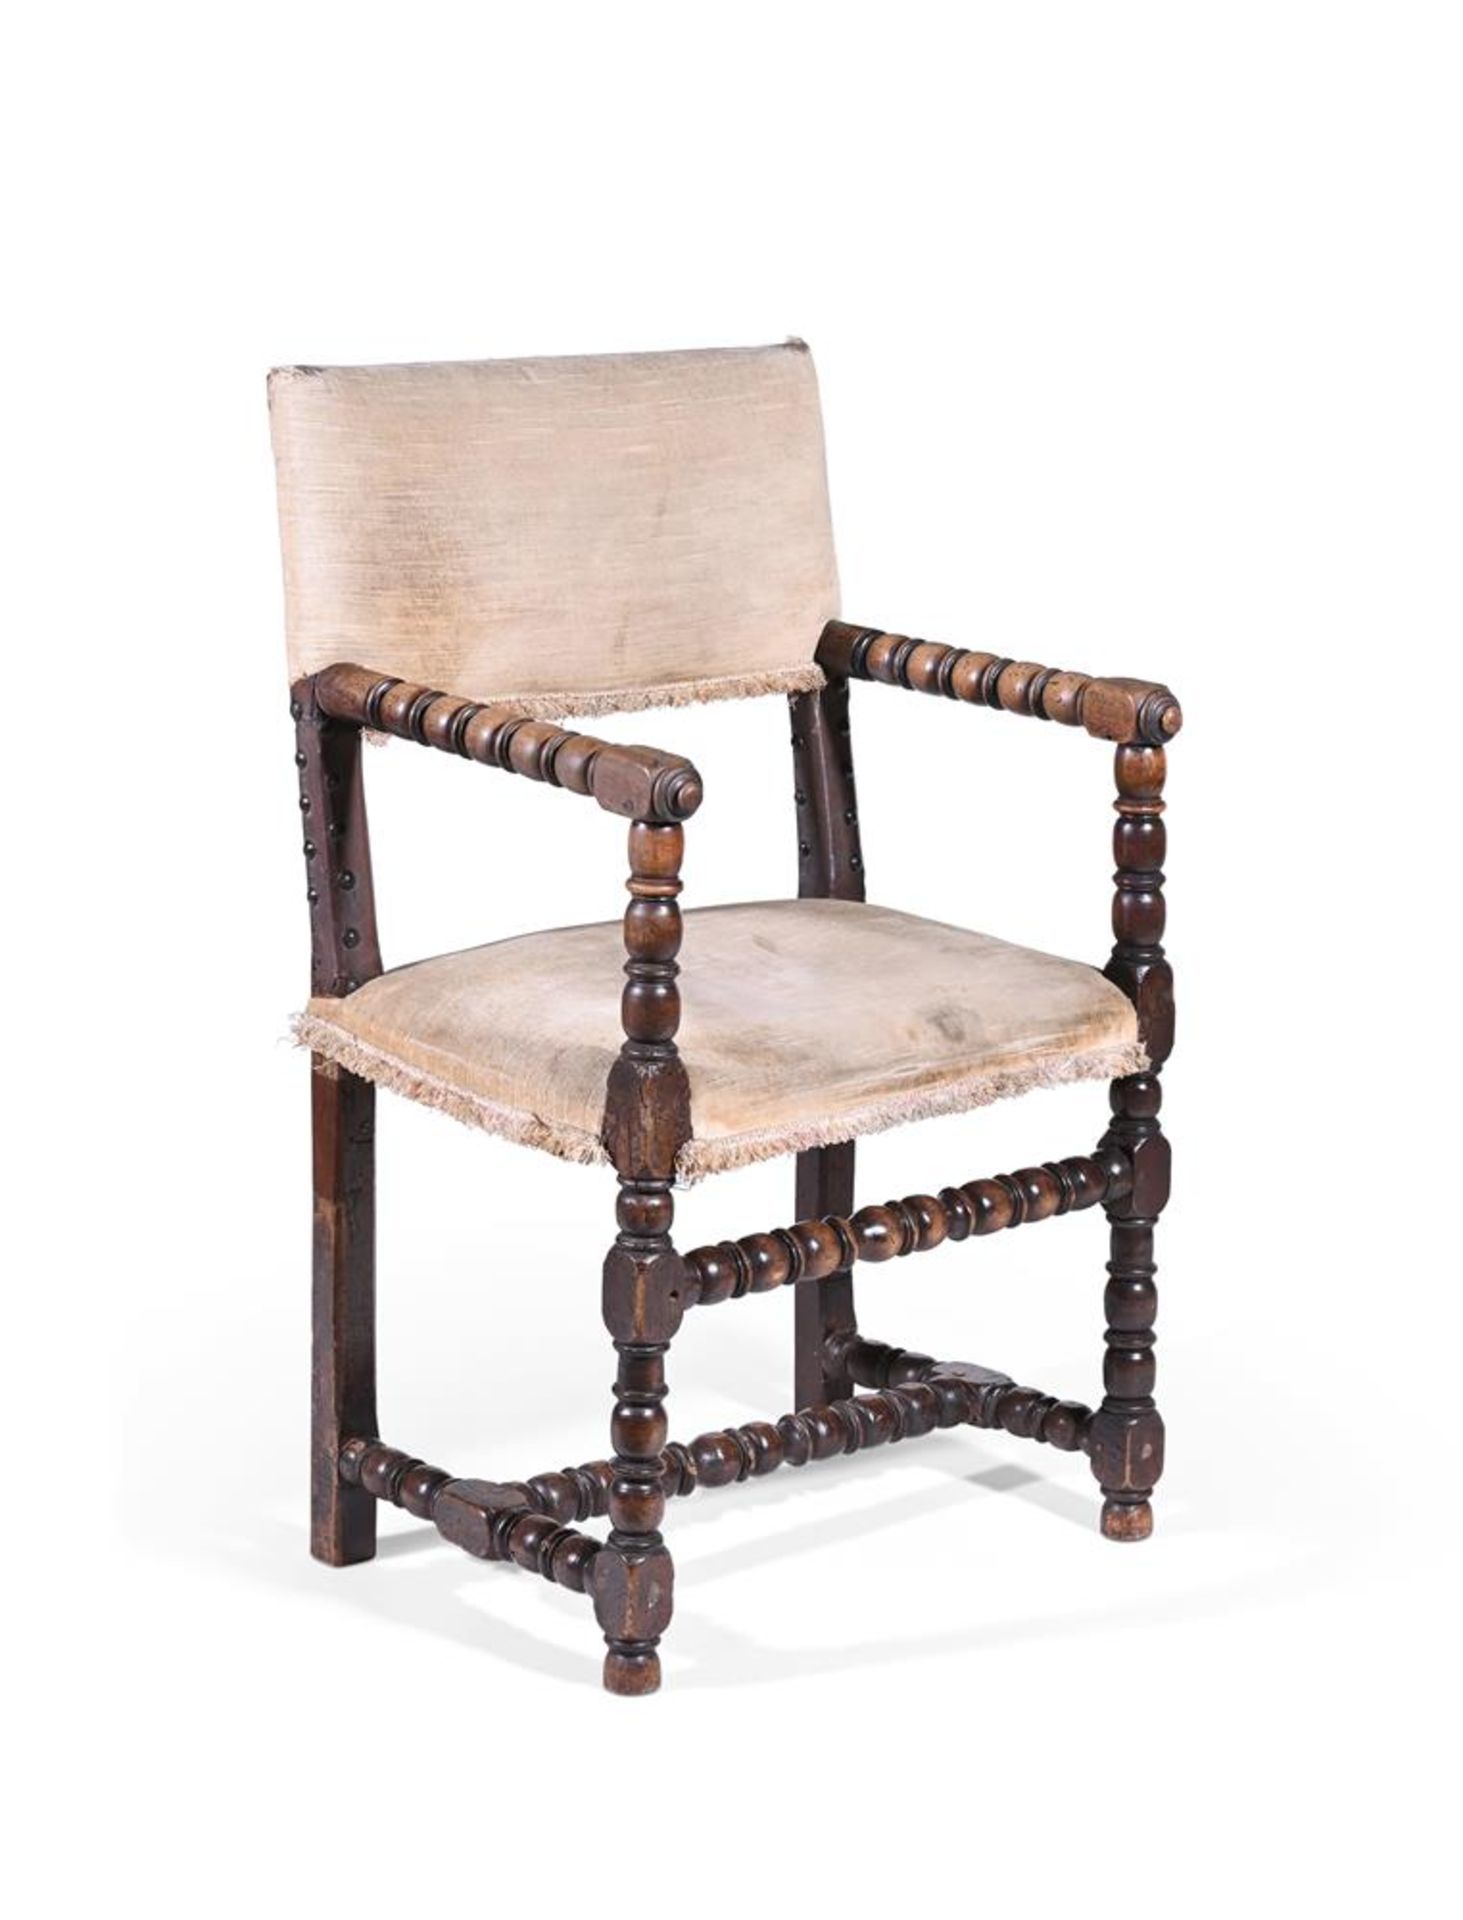 A SPANISH TURNED WALNUT ARMCHAIR, LATE 18TH CENTURY - Image 2 of 2